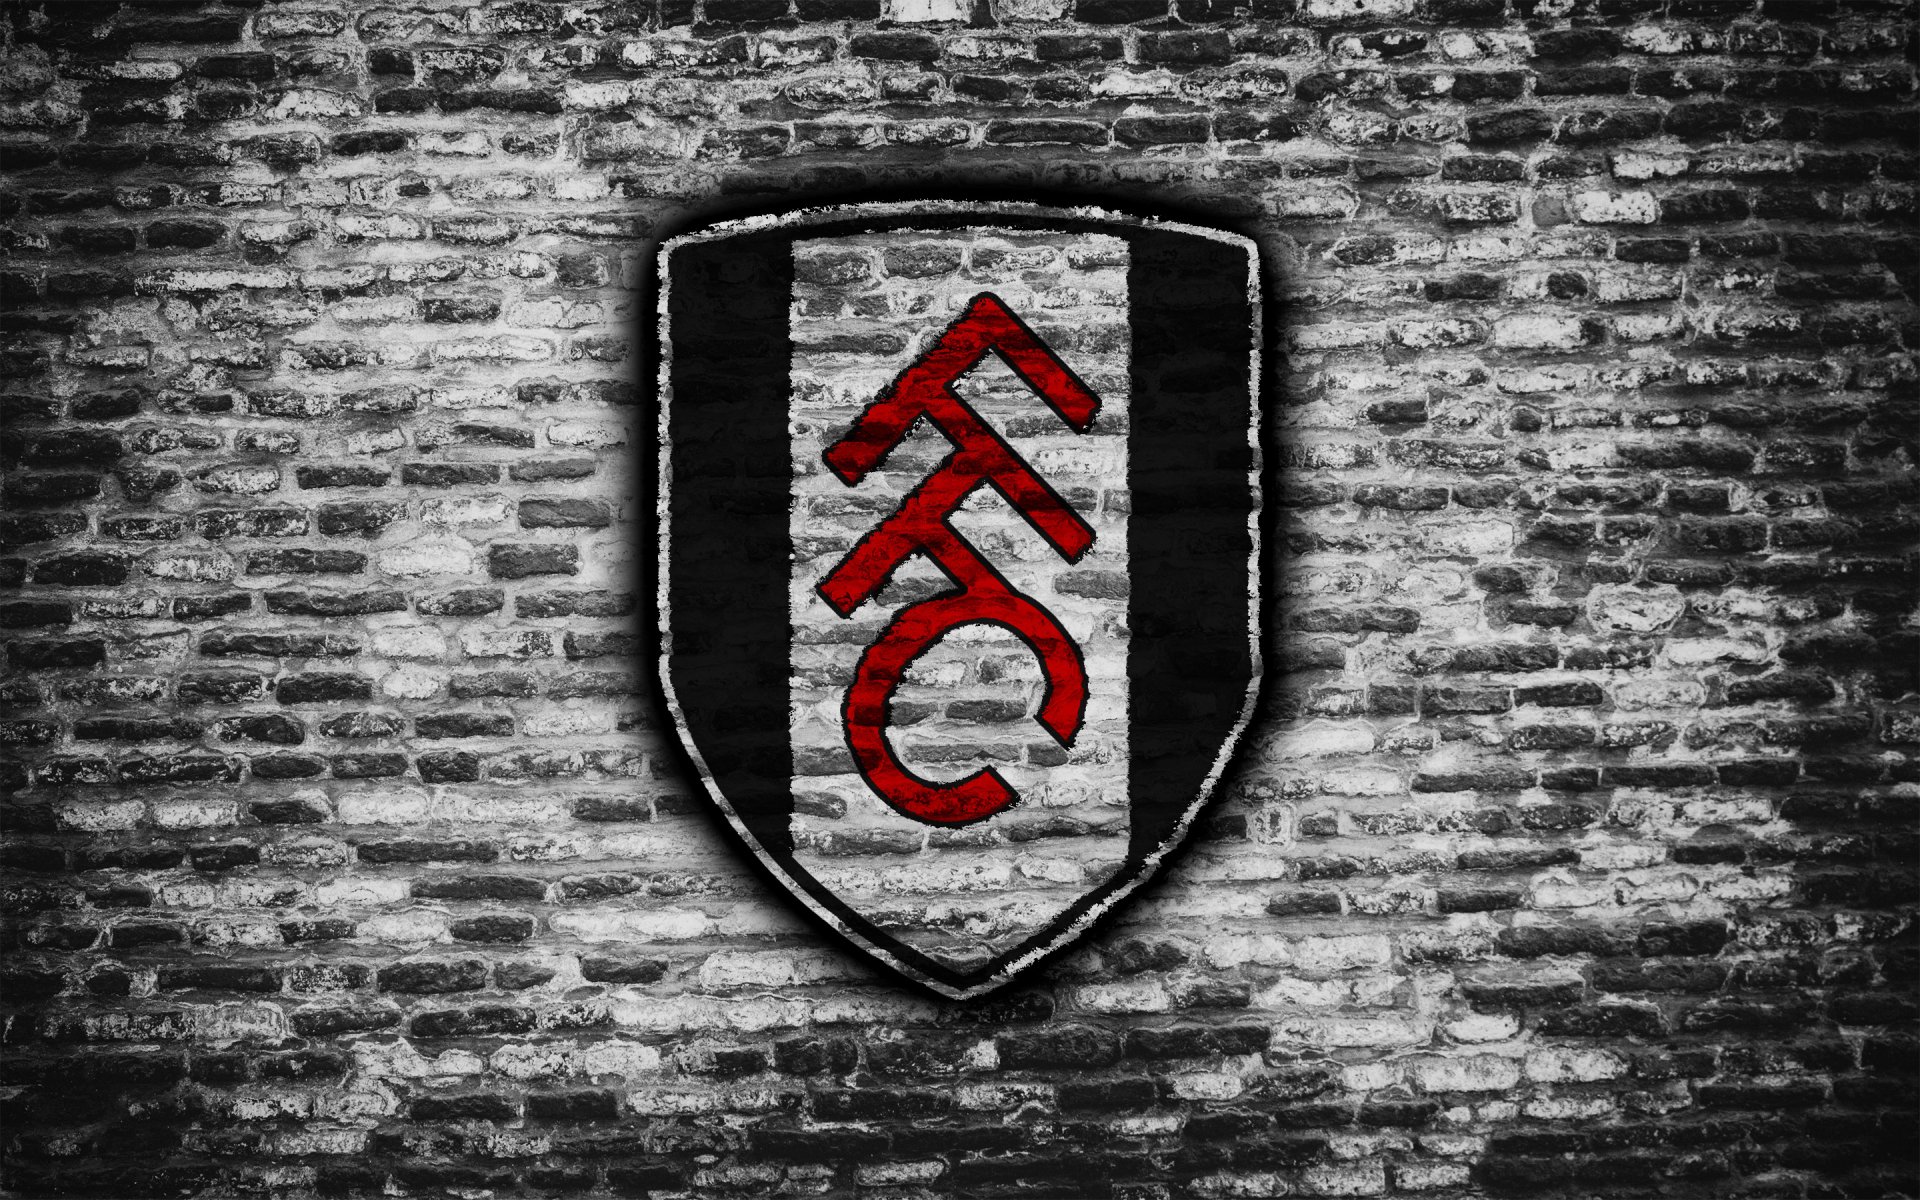  The logo of Fulham FC, a football club that participated in the Premier League in the 2013-14 season.